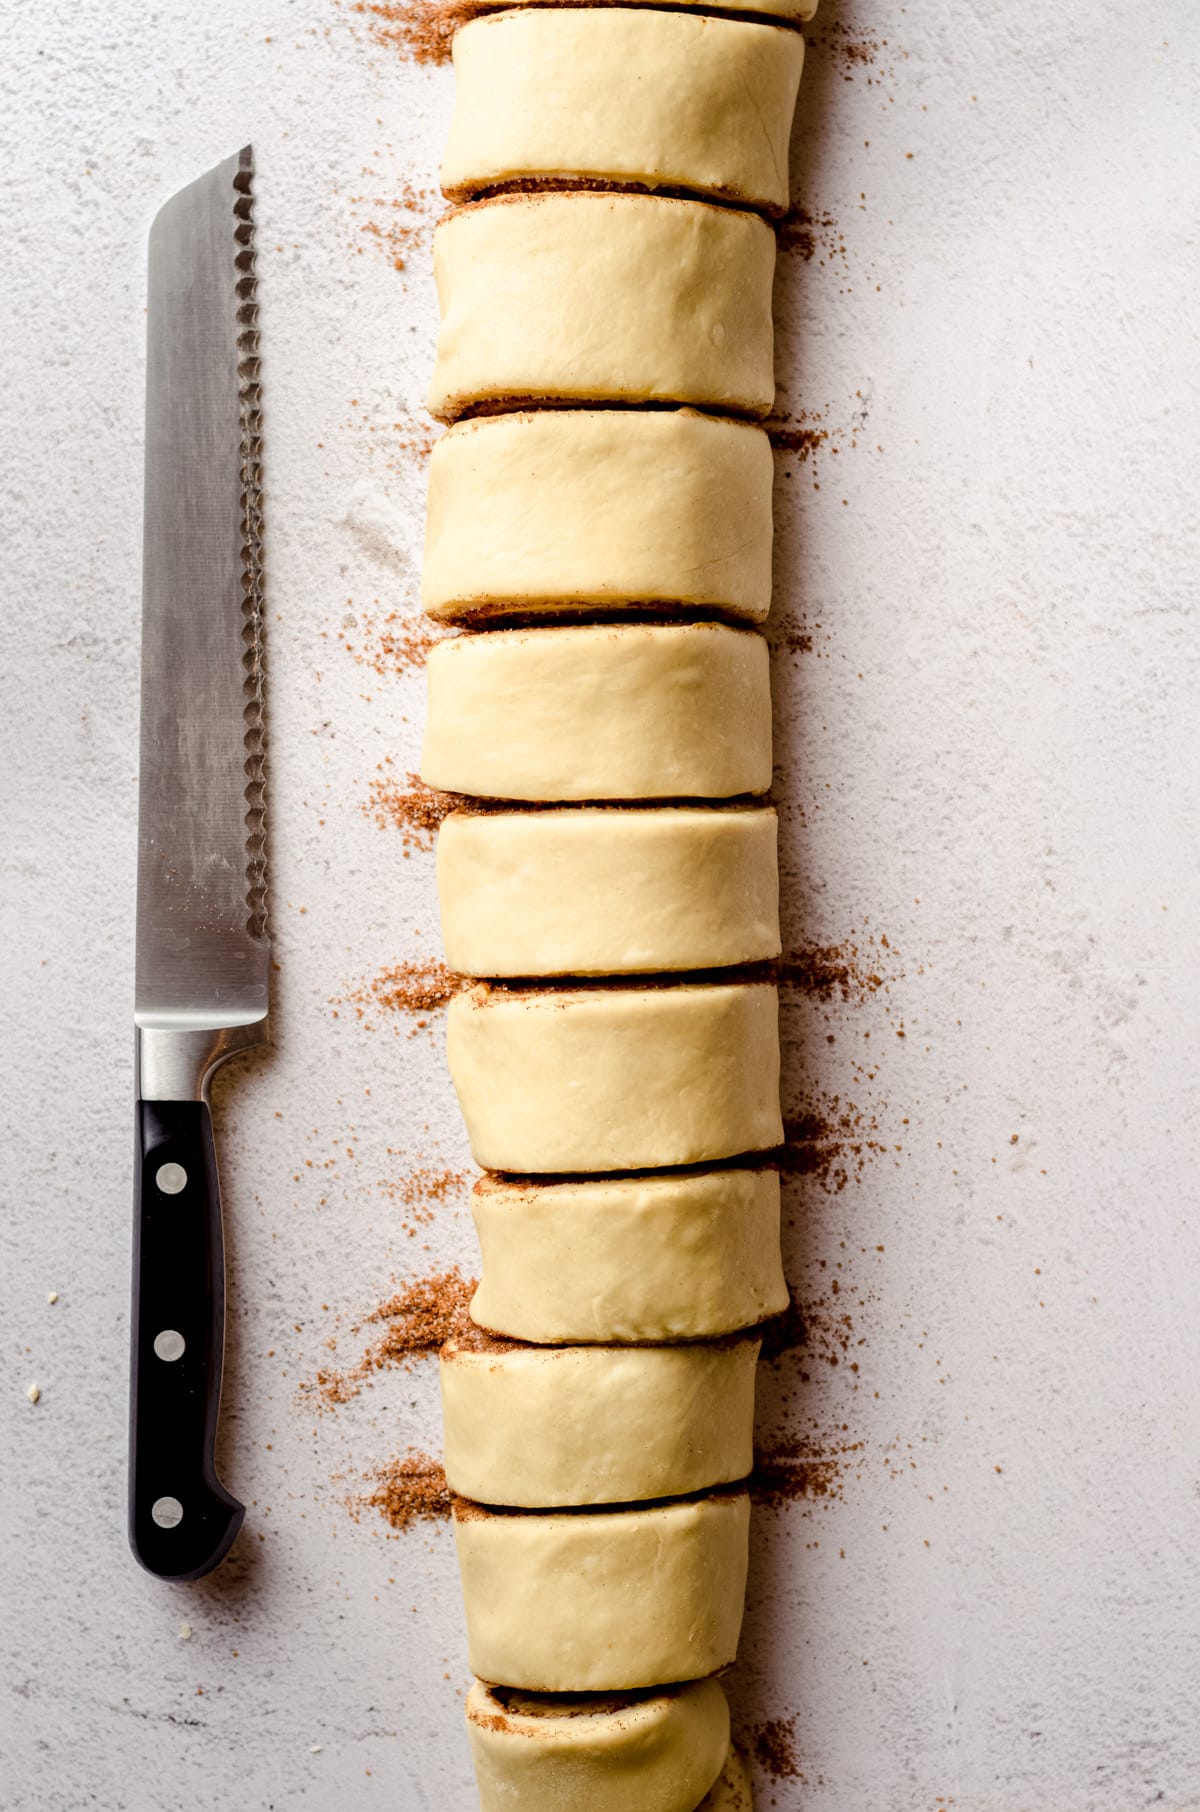 An aerial photo of a log of cinnamon roll dough sliced into portions with a serrated knife next to it.